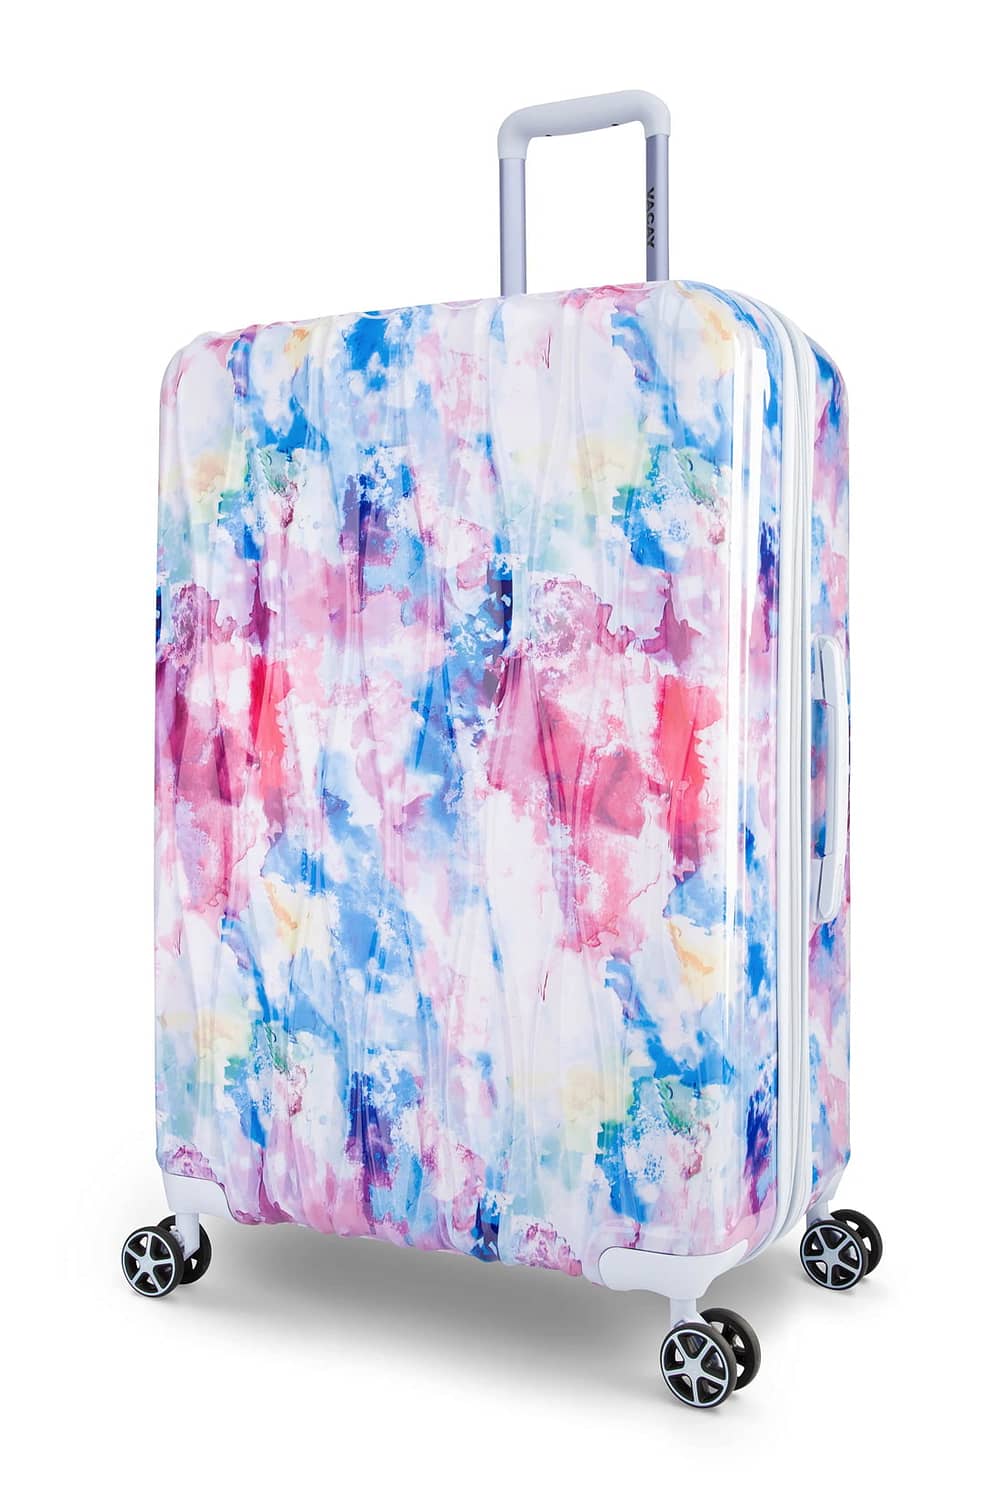 Best deal on checked luggage